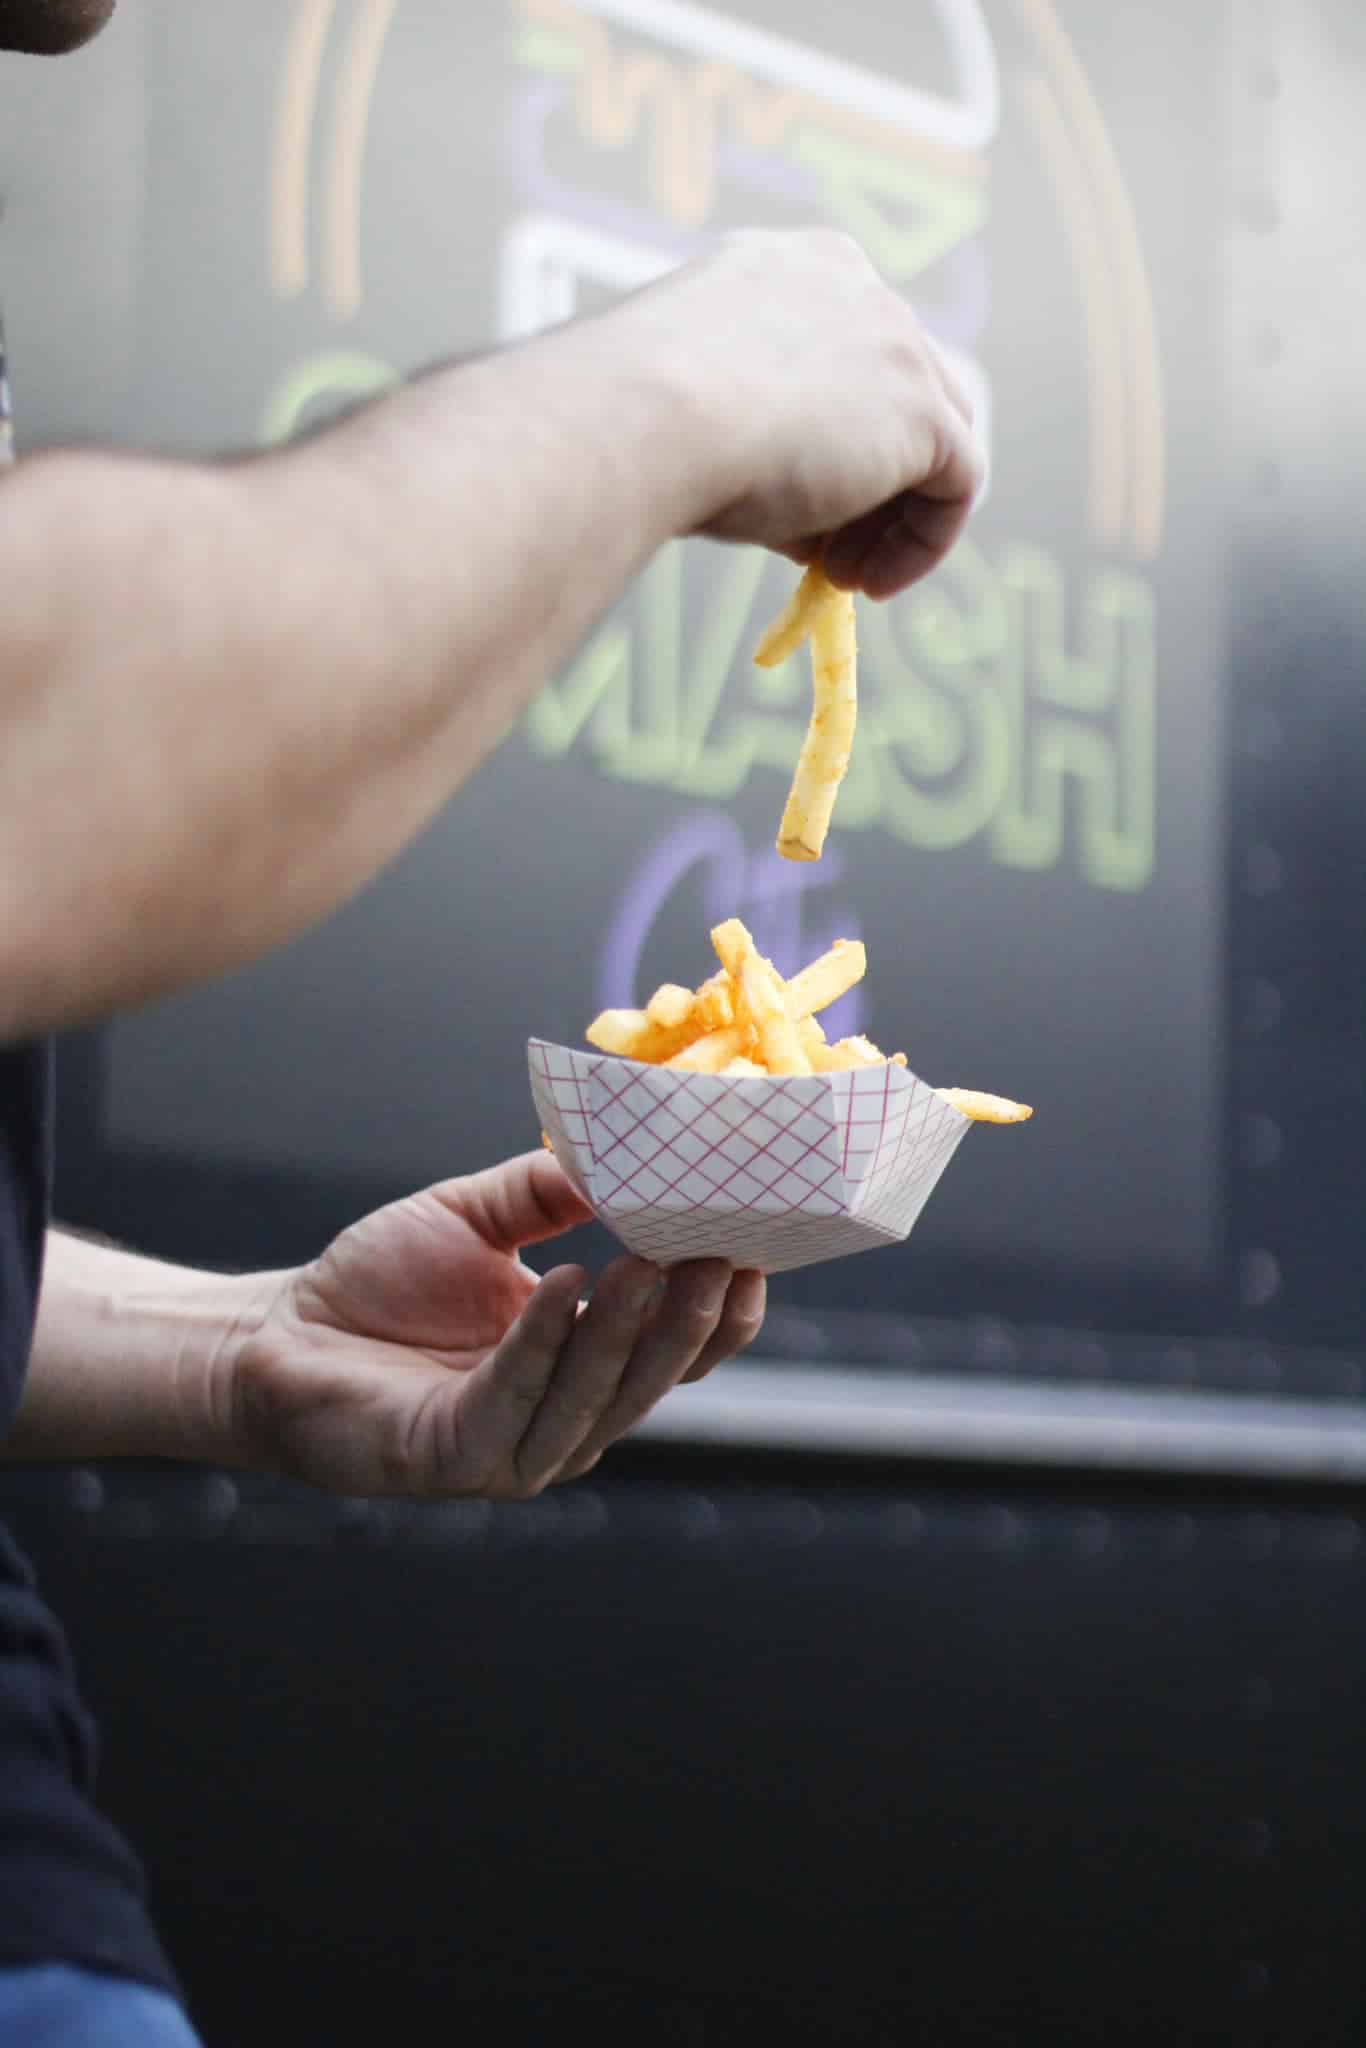 A person holding a paper bowl of fries, picking one up, with a colorful truck logo blurred in the background.